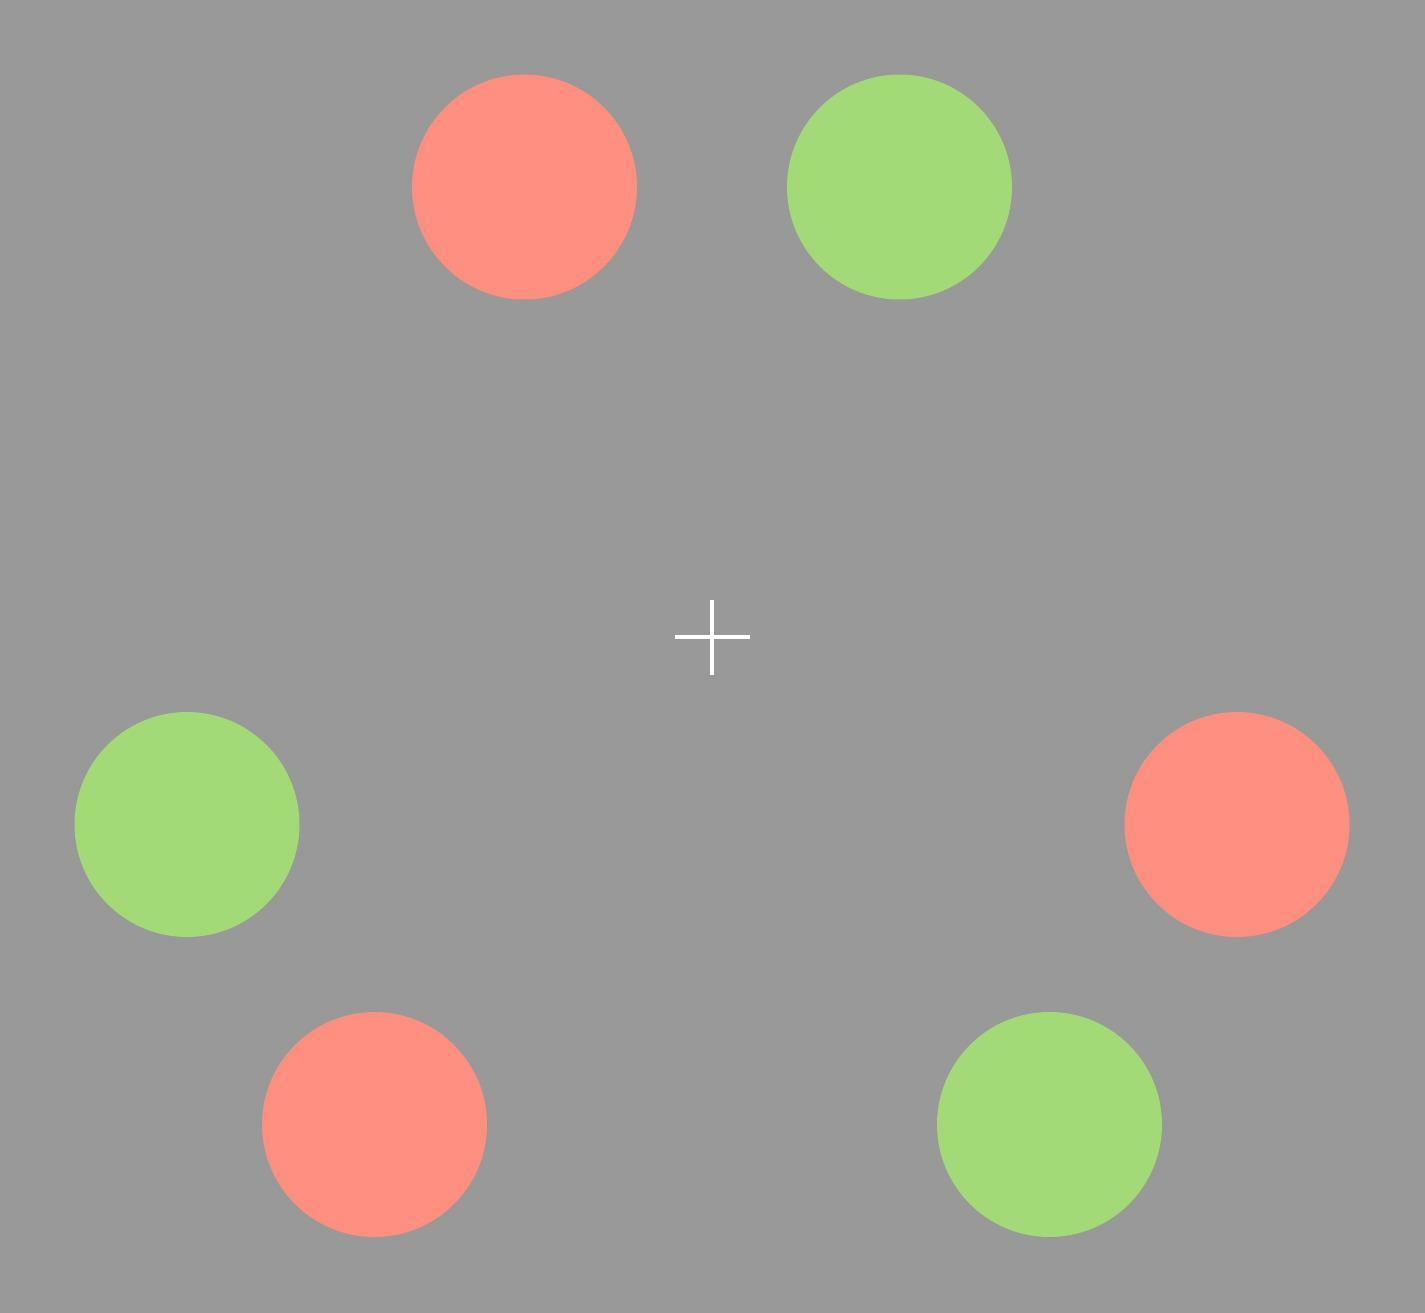 Testing attentional modulations of Troxler fading. In Lou’s study, participants must direct their attention to either the green or the orange disks while maintaining fixation on the center and press a key to report the disappearance of a disk. Adaptation (in color) from Lou, L., Perception 28(4), p. 521, copyright © 1999 by SAGE Publications. Reprinted by Permission of SAGE Publications.